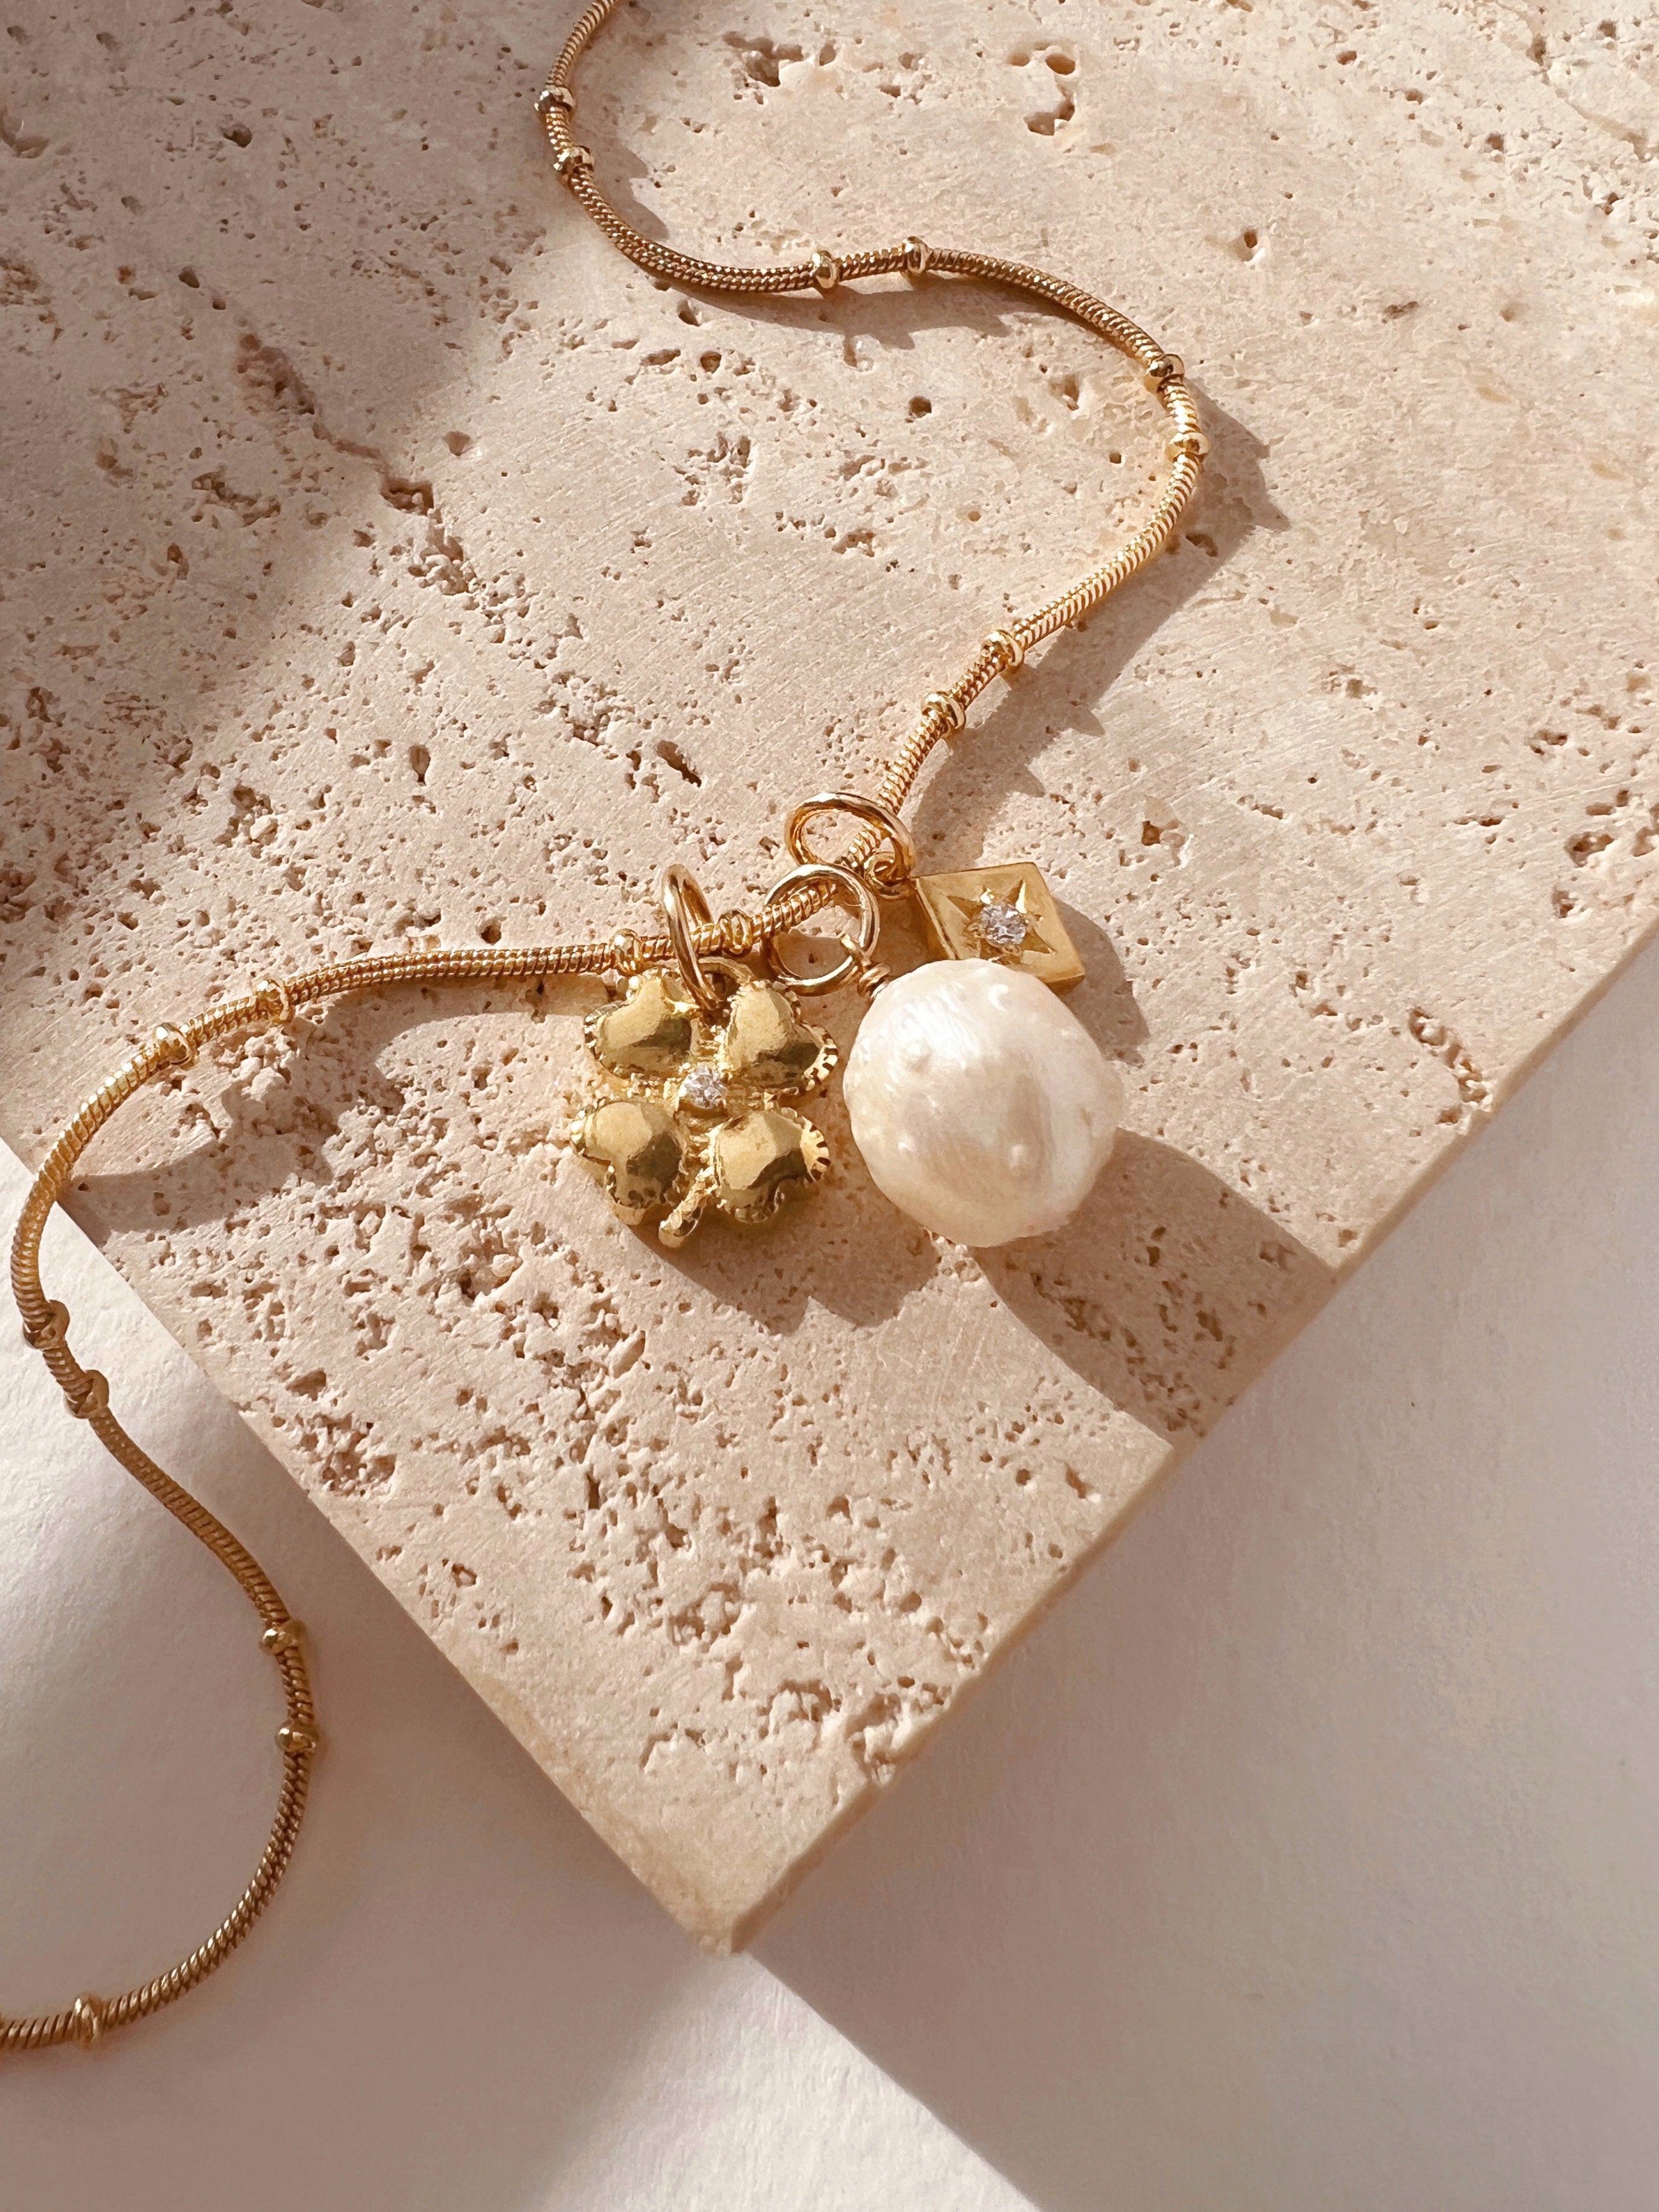 14k yellow gold fill beaded satellite chain necklace with freshwater pearl pendant, gold clover pendant and asteria star small pendant 